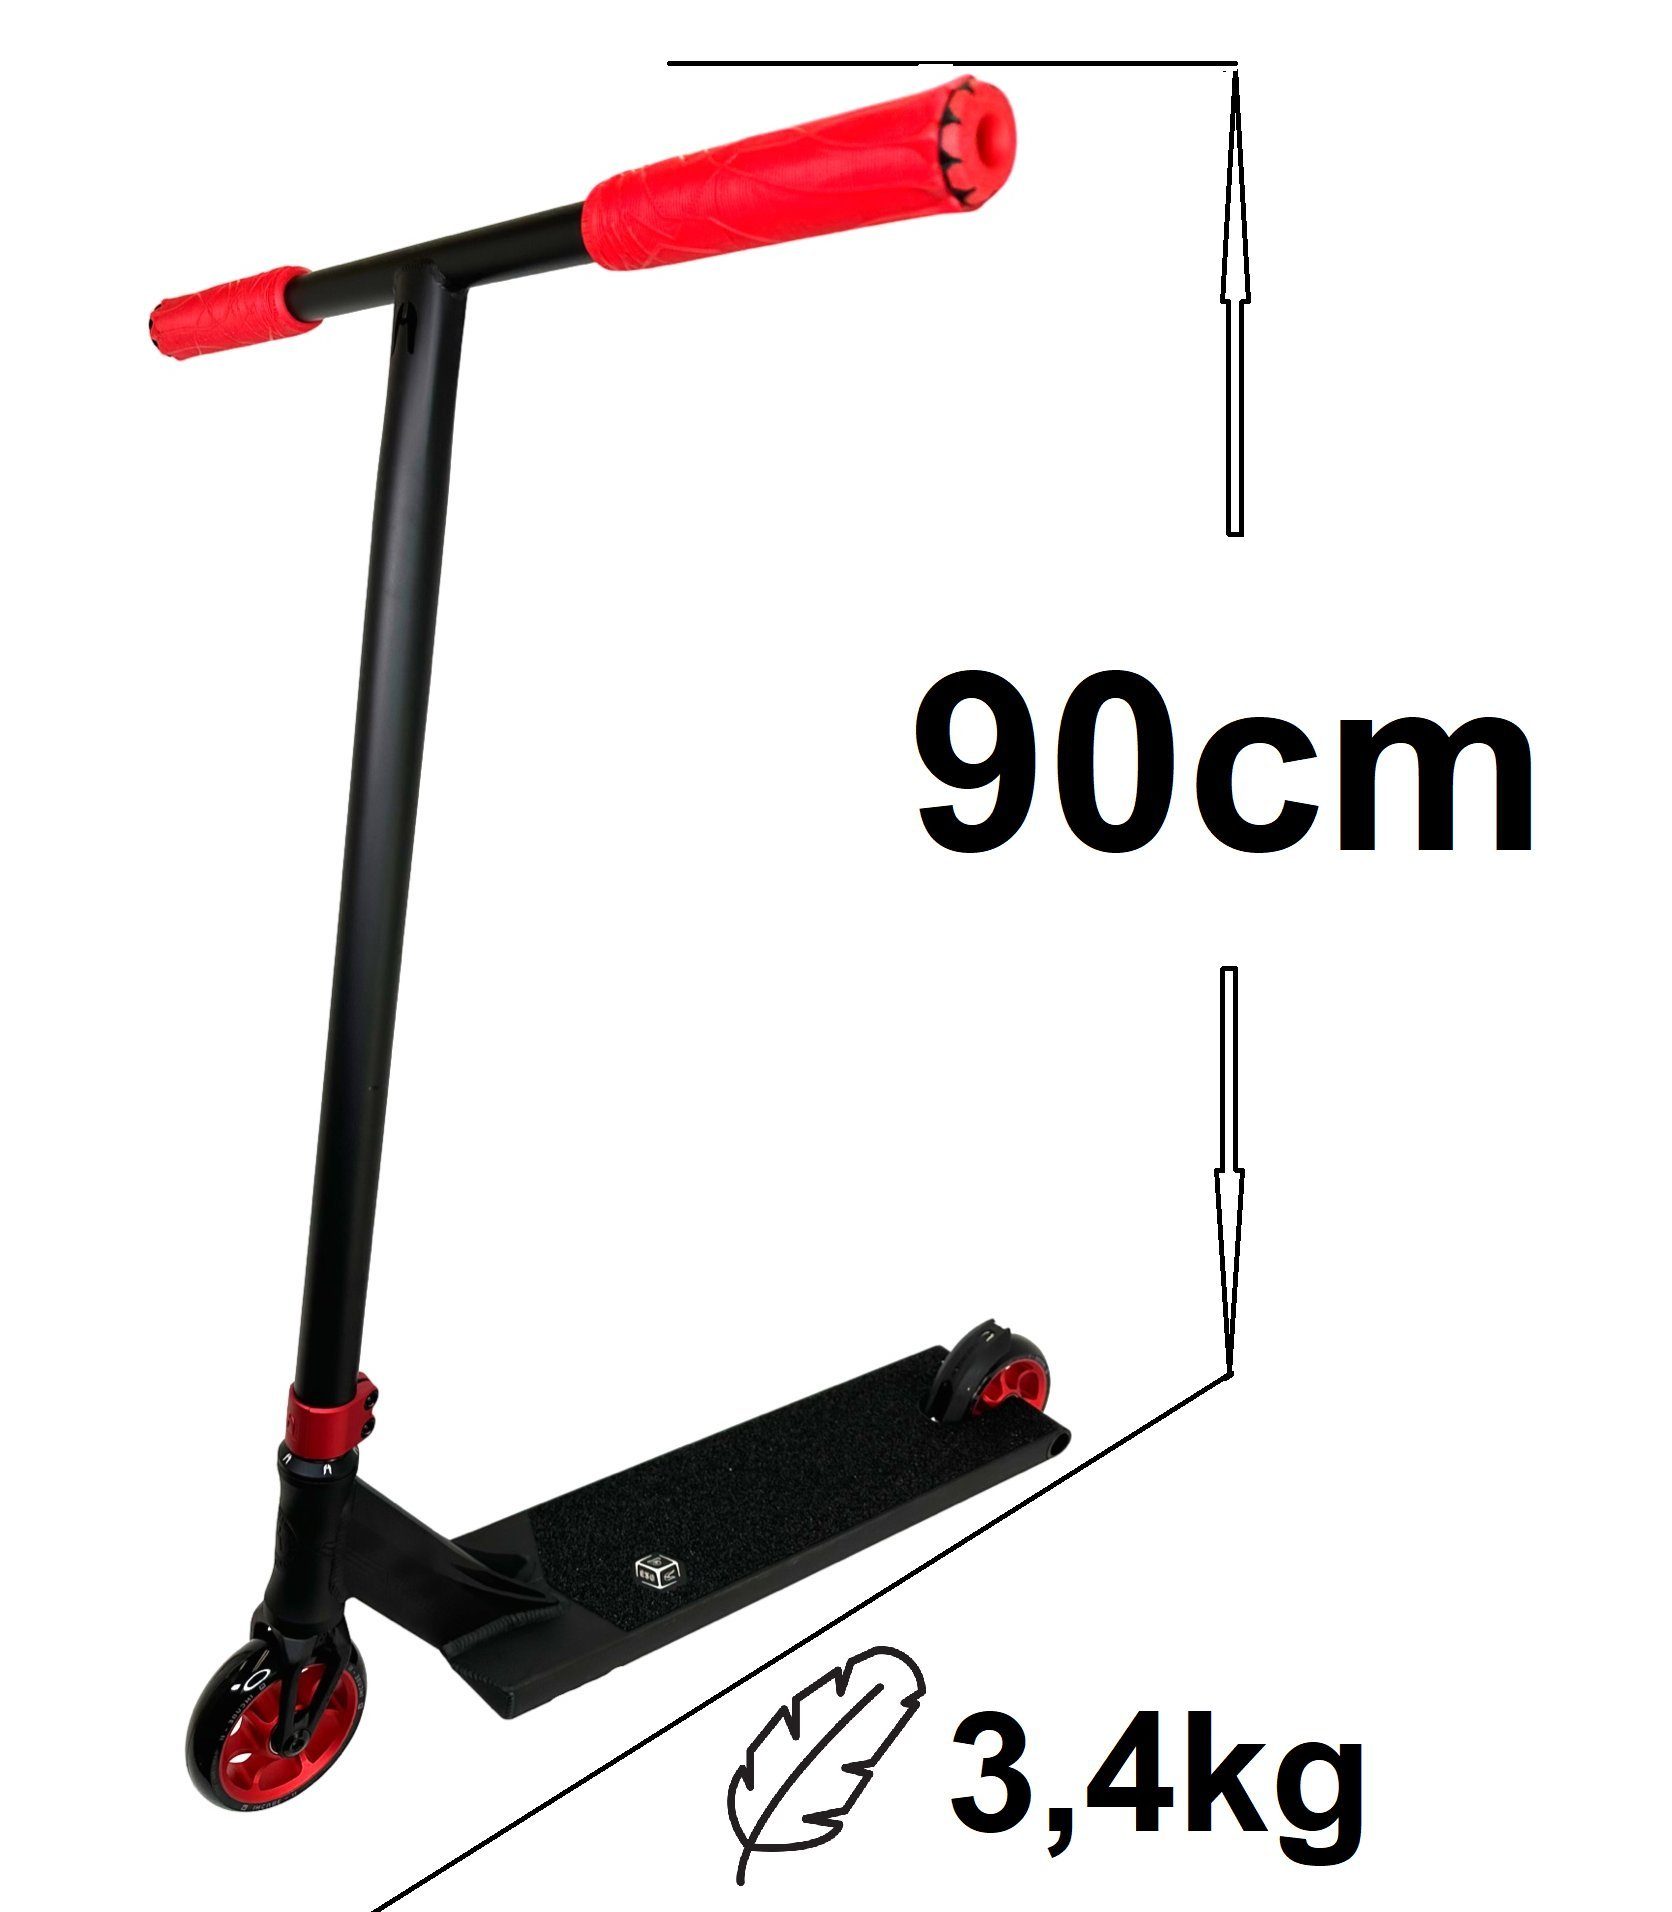 Ethic DTC Stuntscooter Ethic Rot H=90cm DTC Pandora Stunt-Scooter 3,4kg L